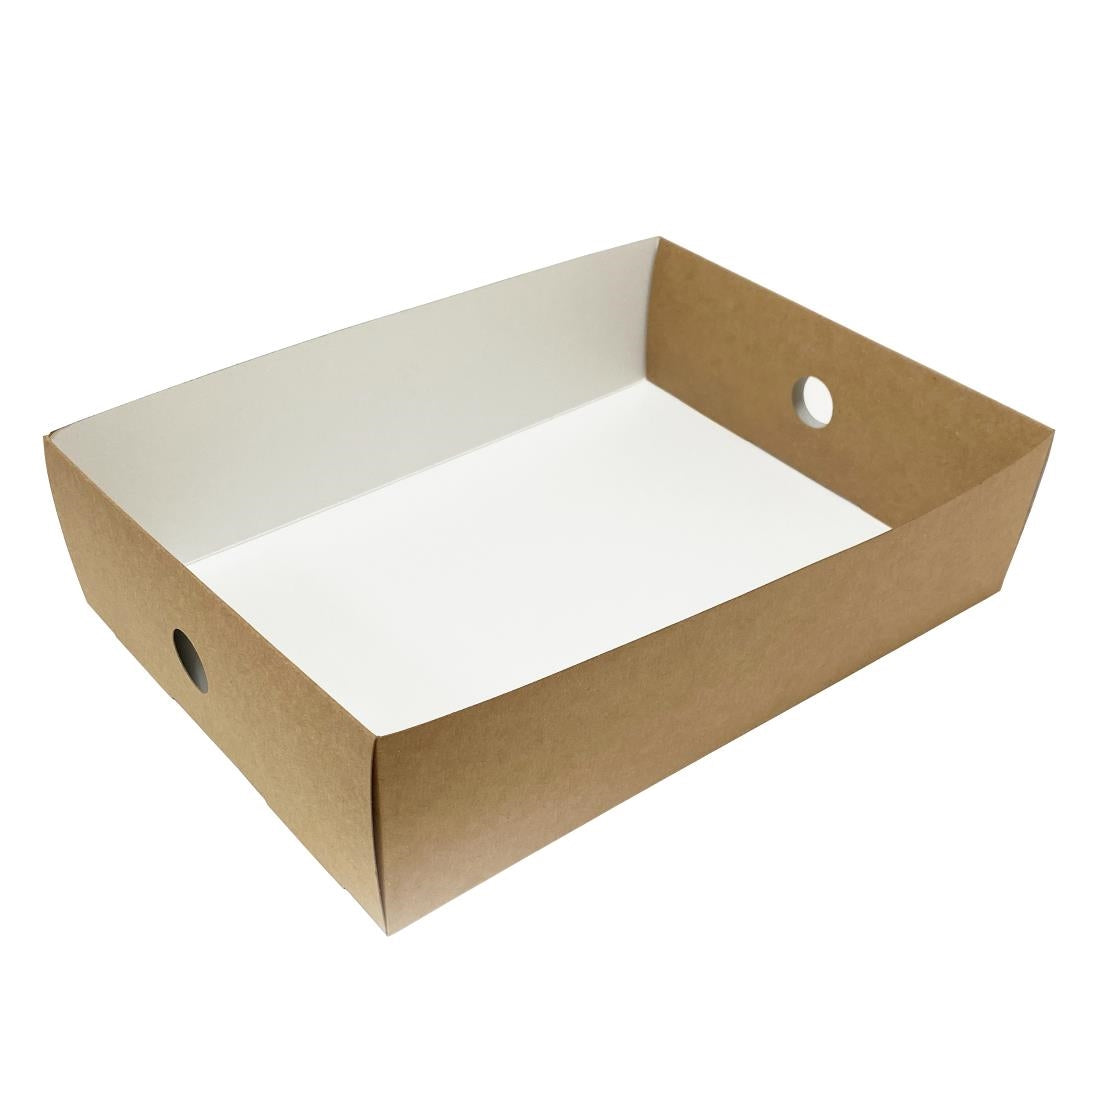 FT675 Fiesta Recyclable Insert For Platter Box 1/2 (Pack of 50) JD Catering Equipment Solutions Ltd